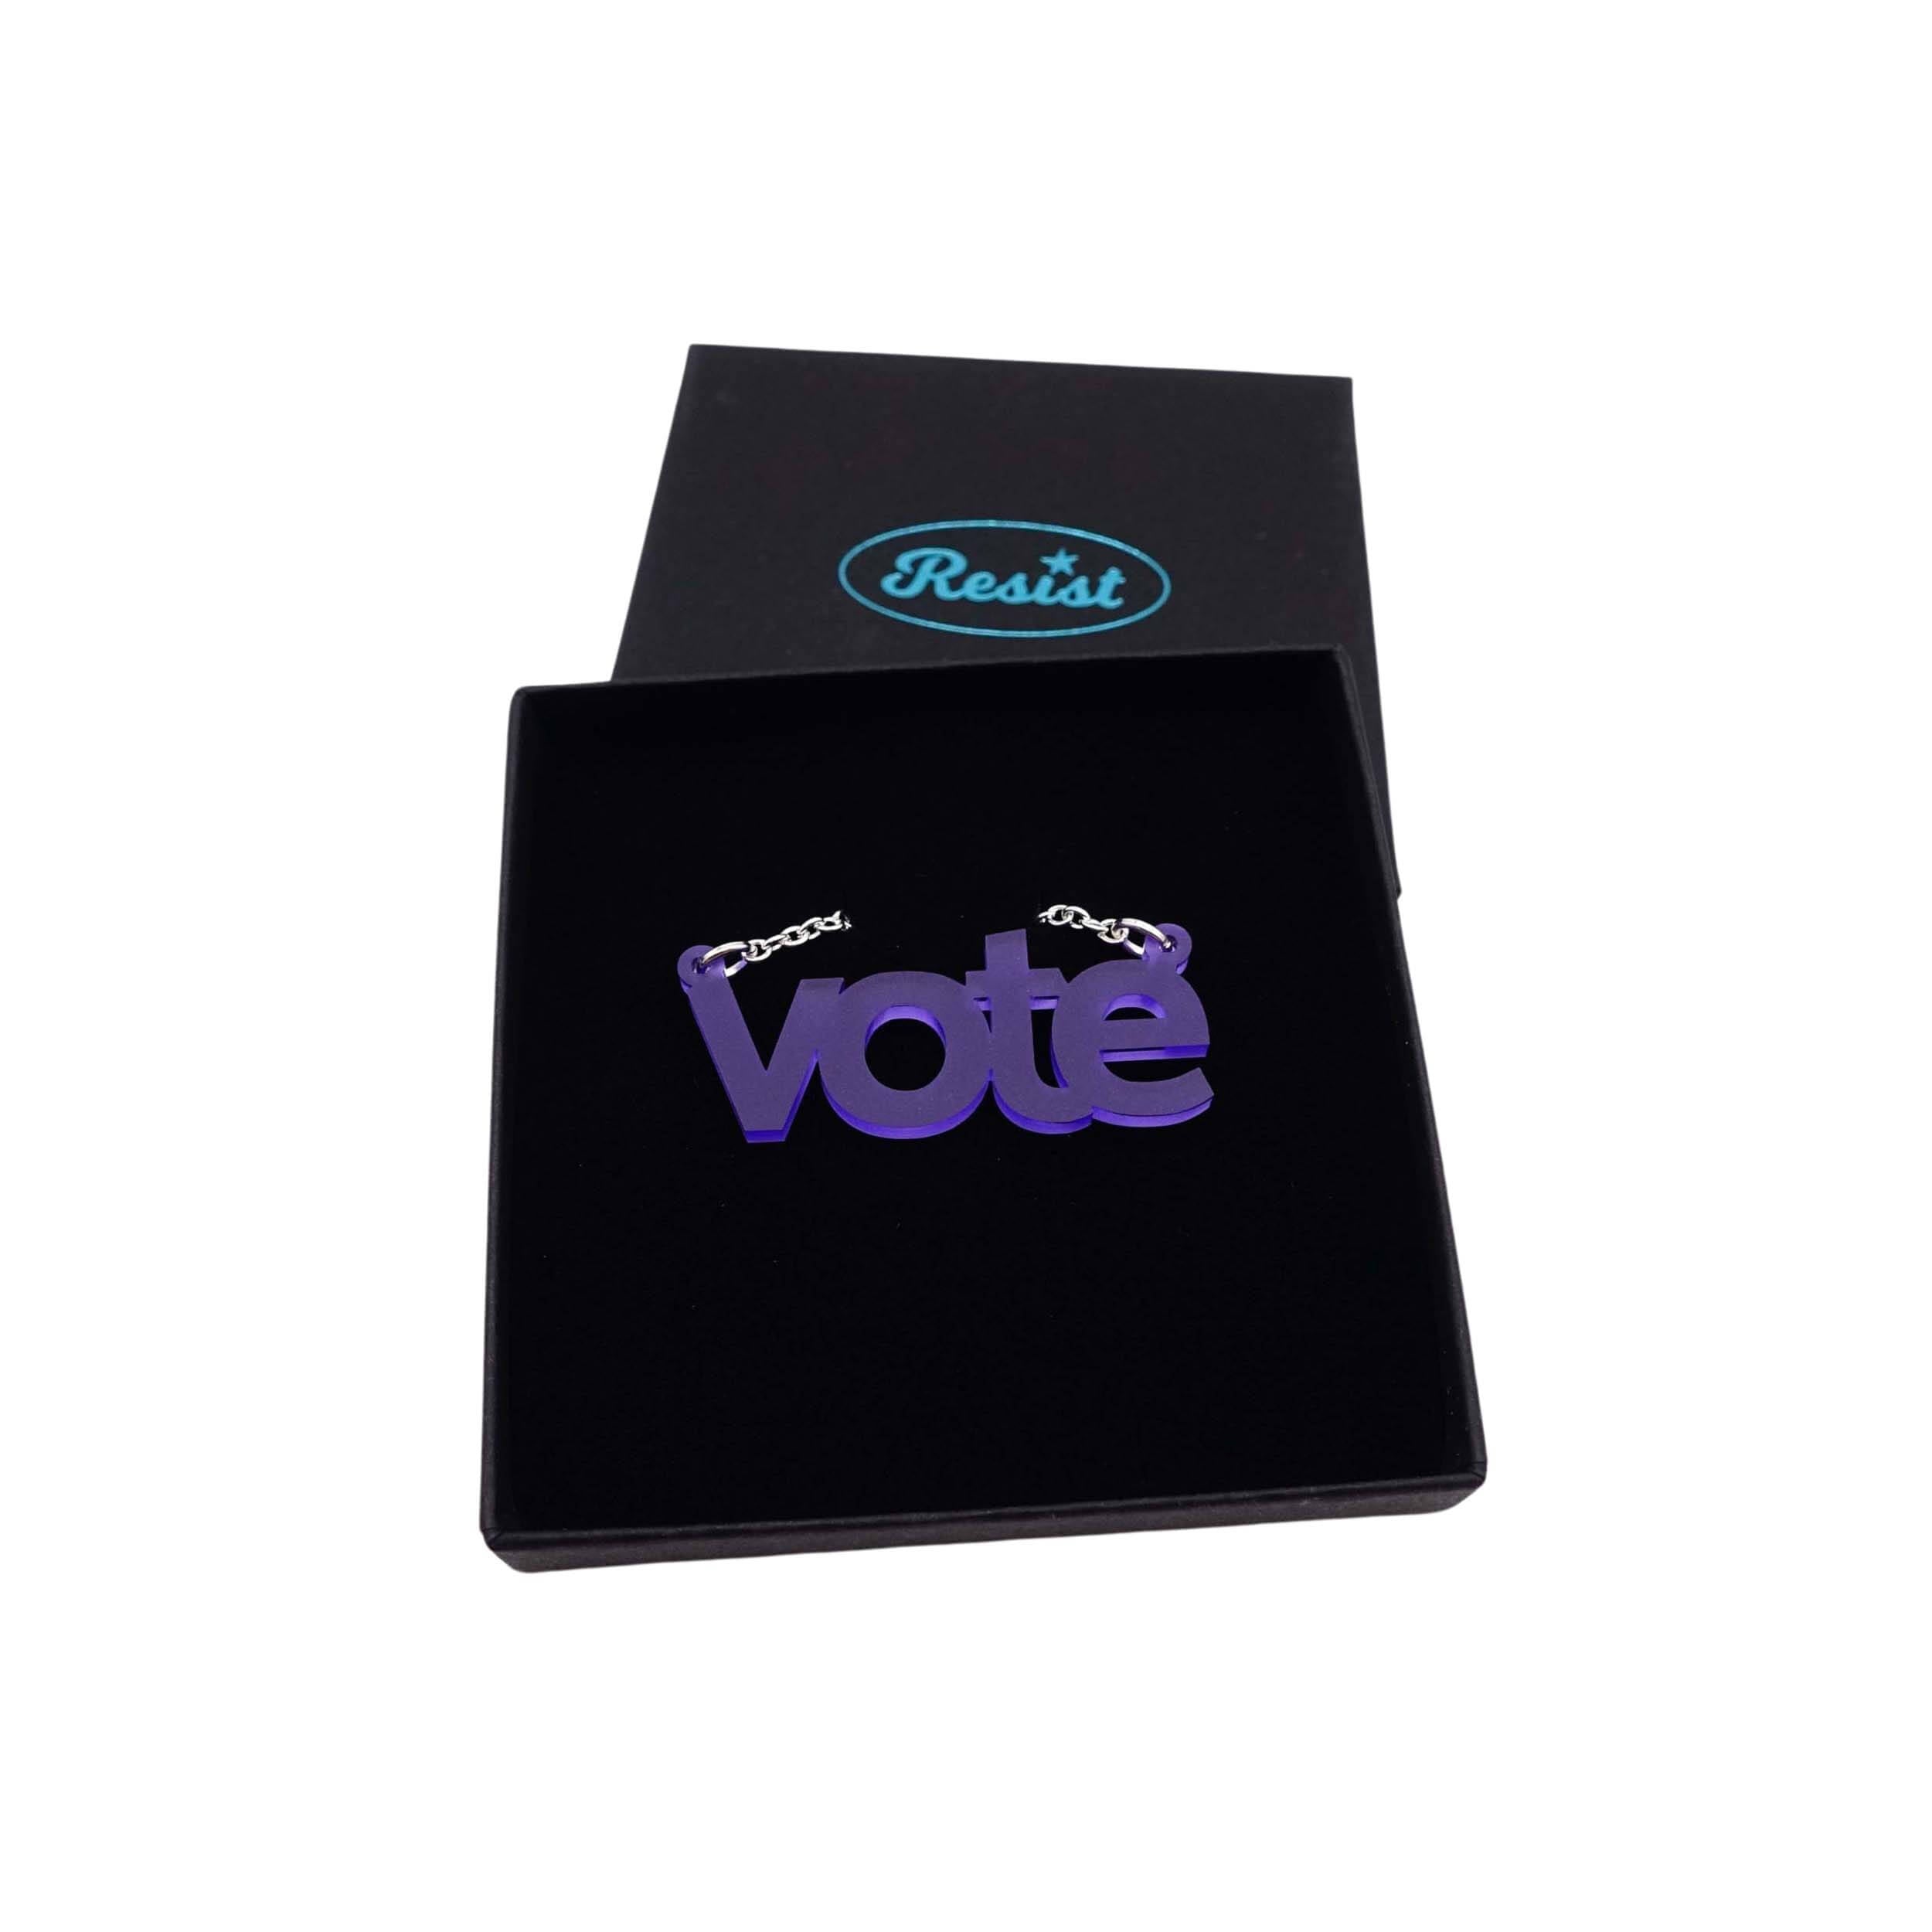 Vote necklace in violet frost shown in a Wear and Resist gift box.  